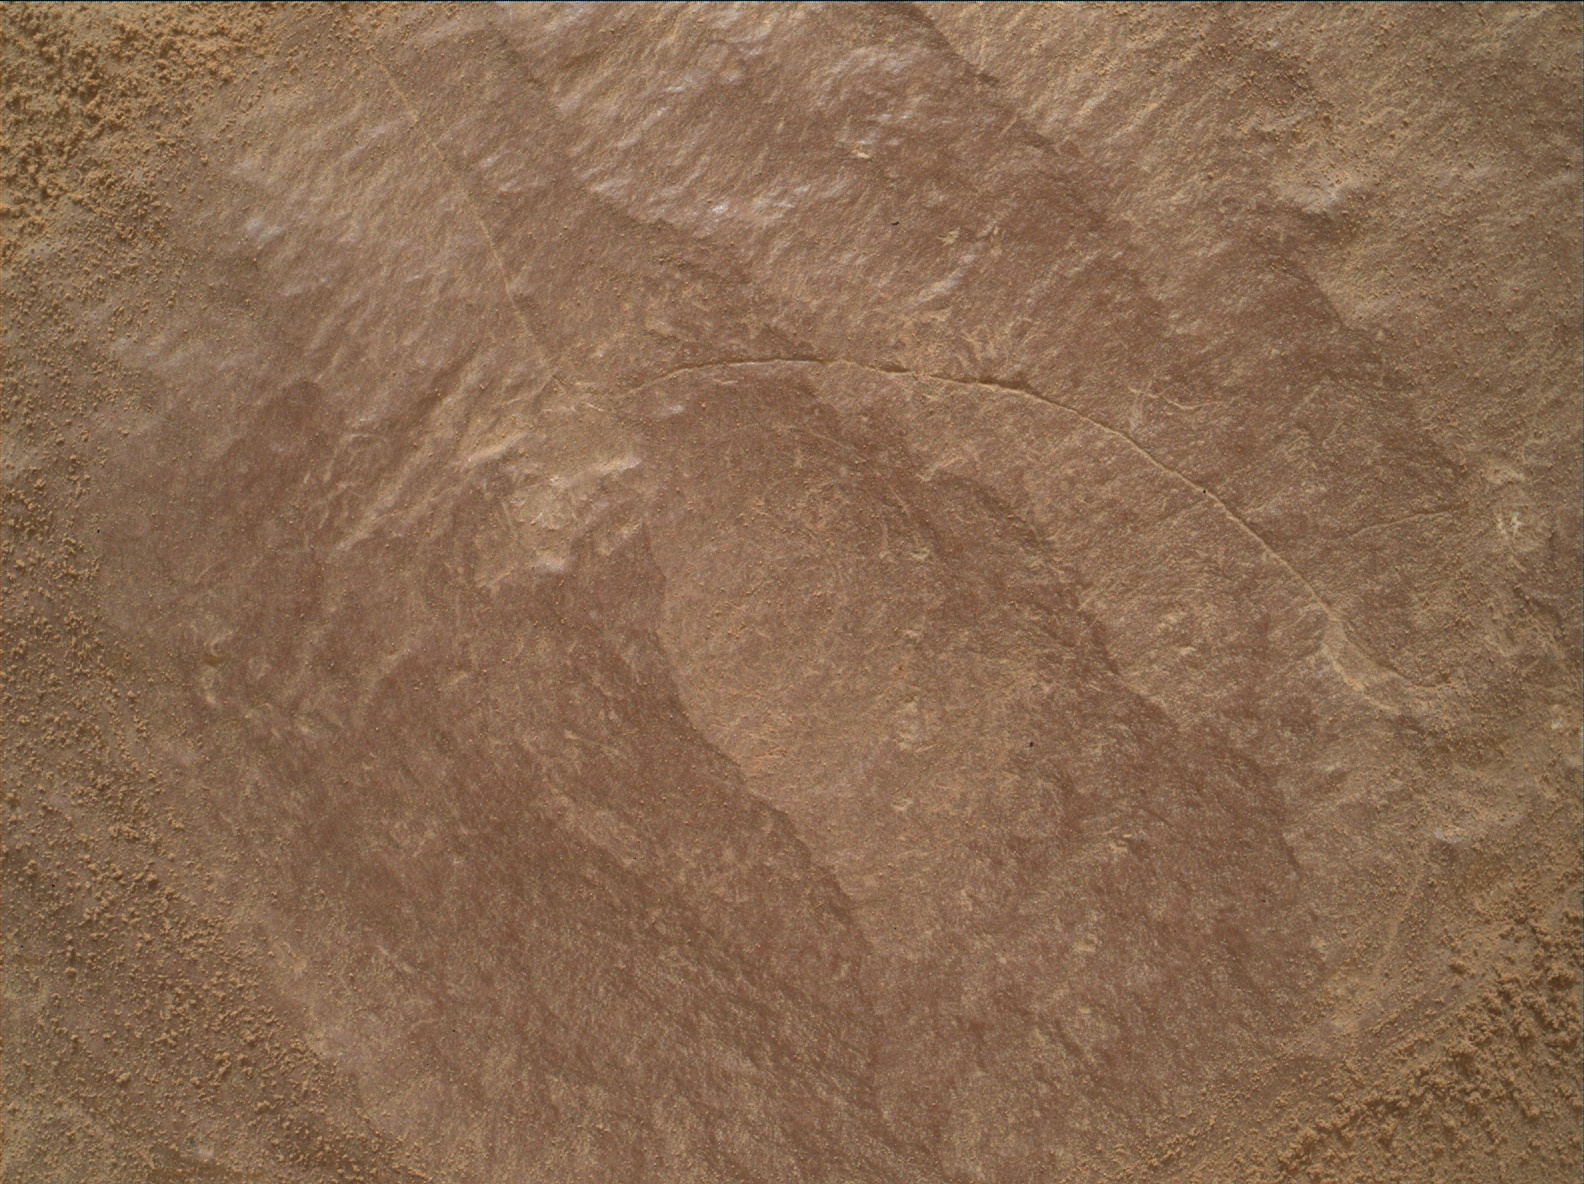 Nasa's Mars rover Curiosity acquired this image using its Mars Hand Lens Imager (MAHLI) on Sol 2302